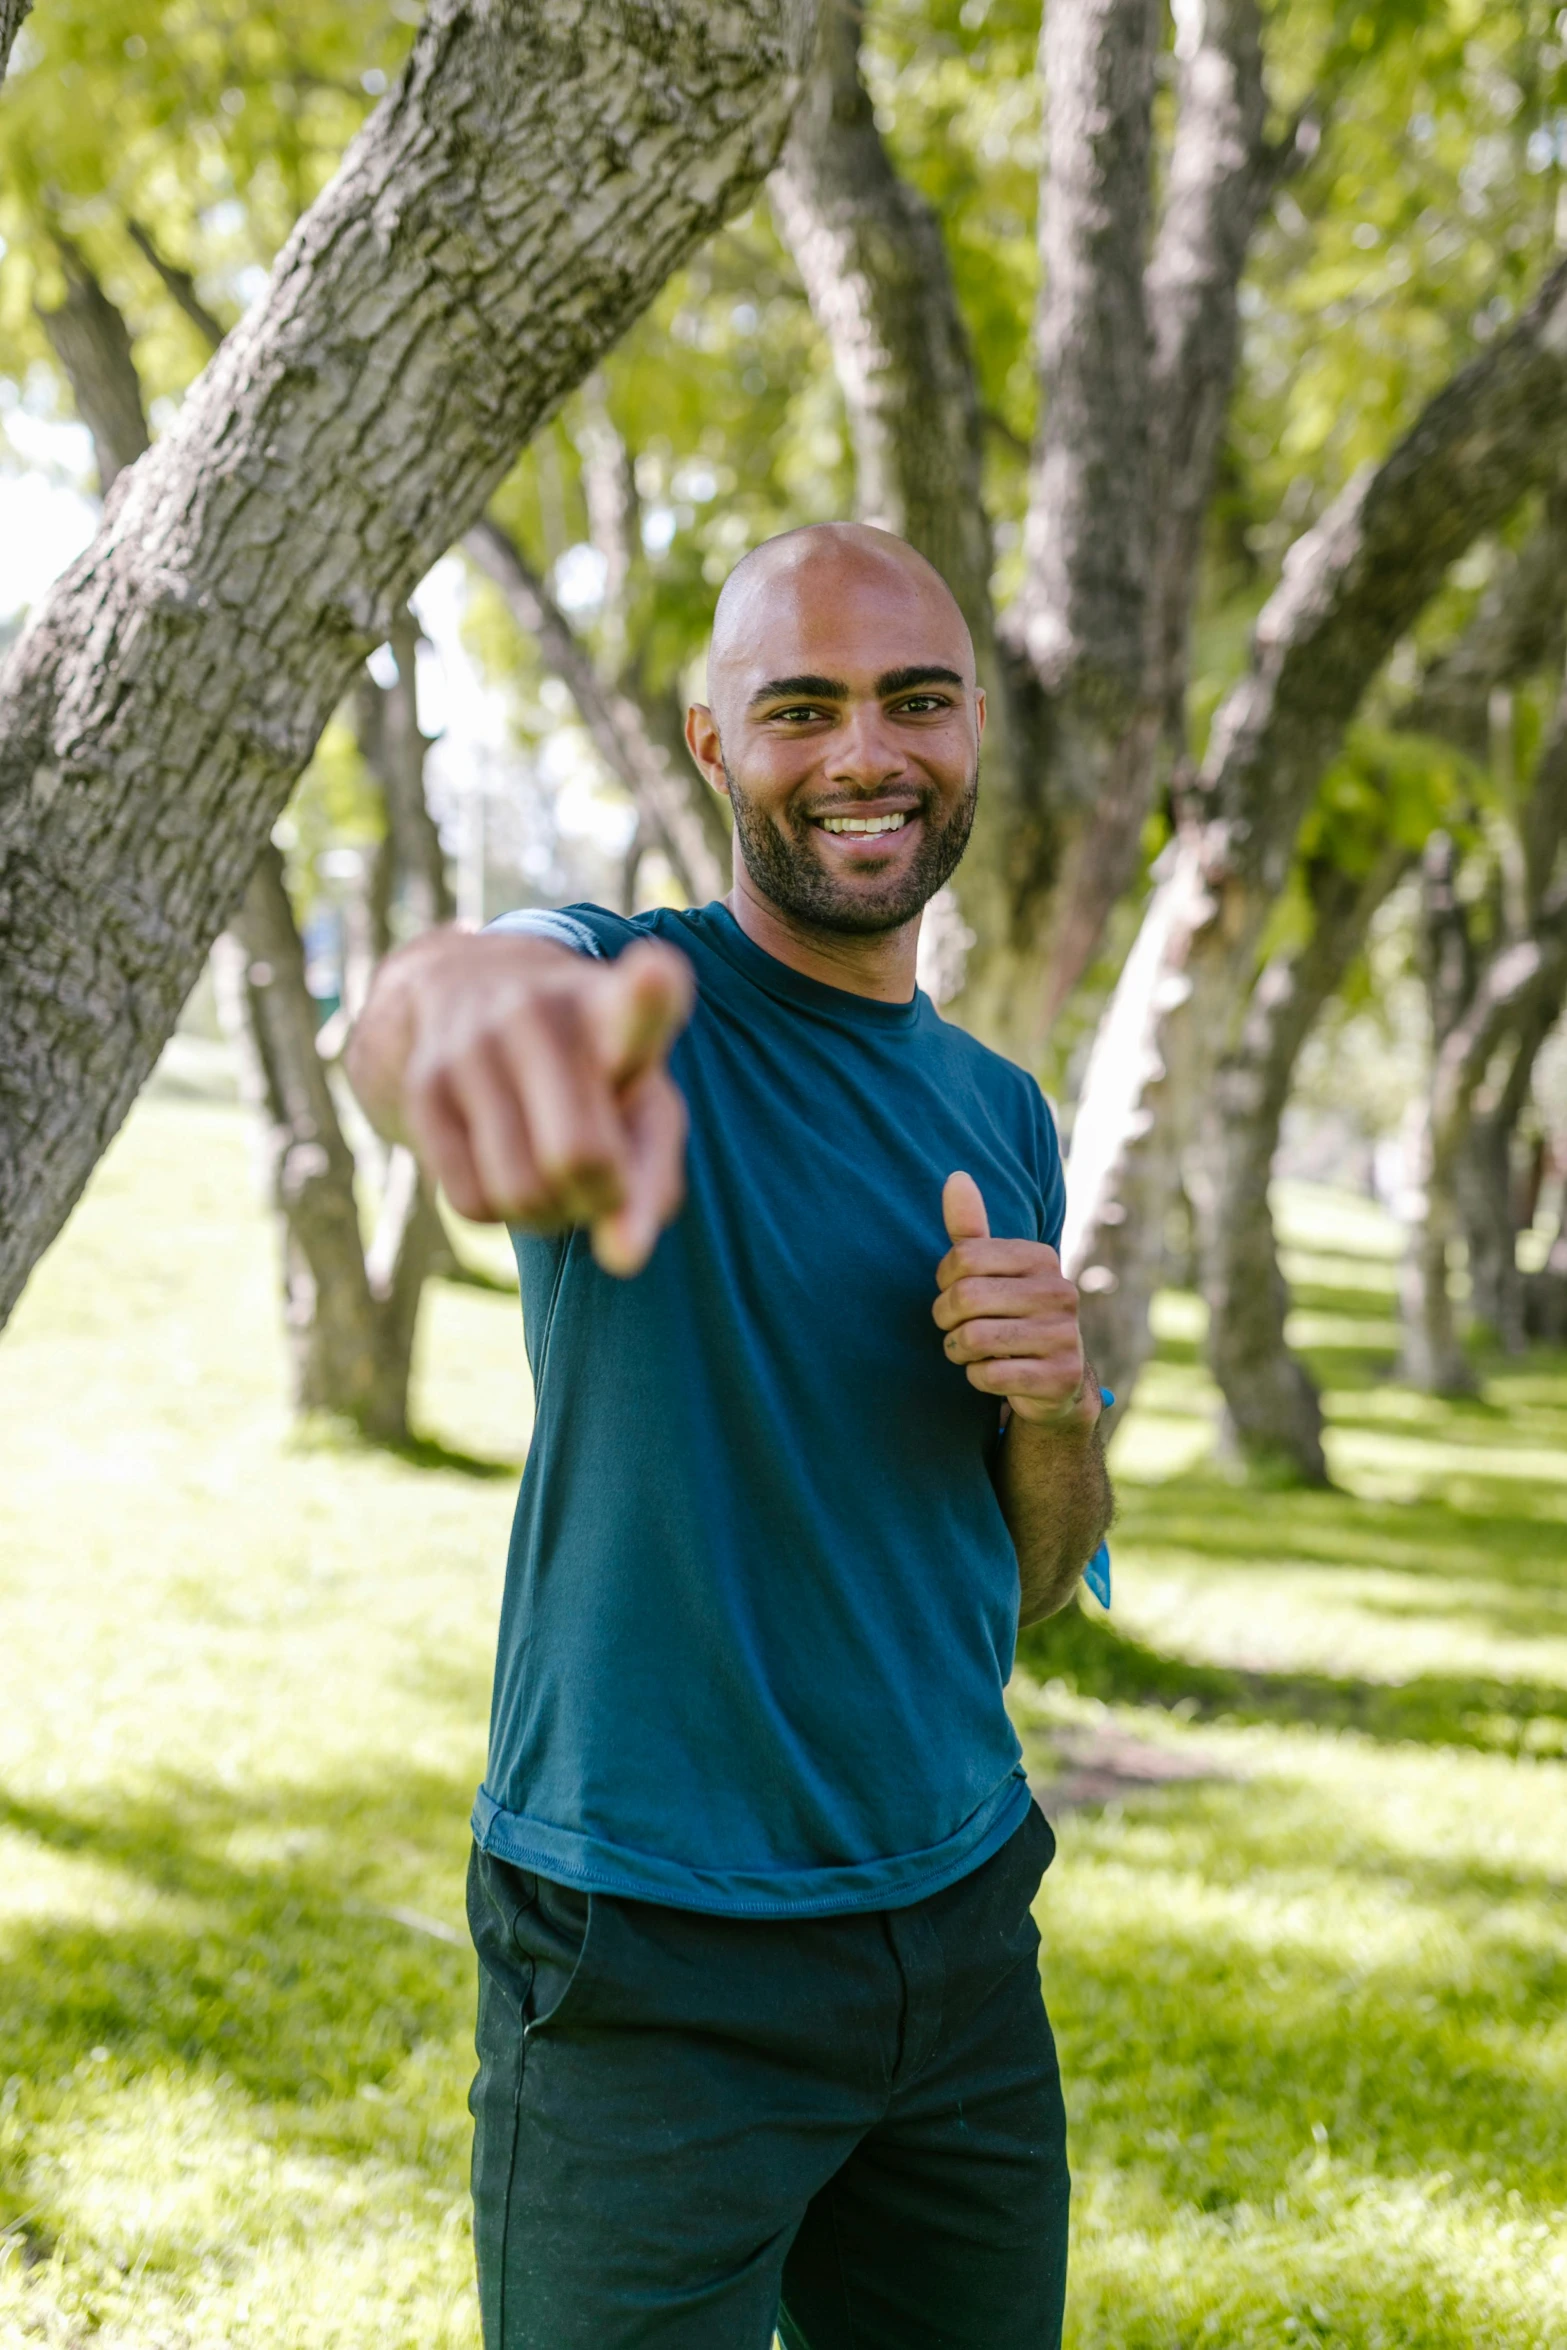 a man throwing a frisbee in a park, inspired by Víctor Manuel García Valdés, happening, giving a thumbs up to the camera, bald, avatar image, 3 2 - year - old